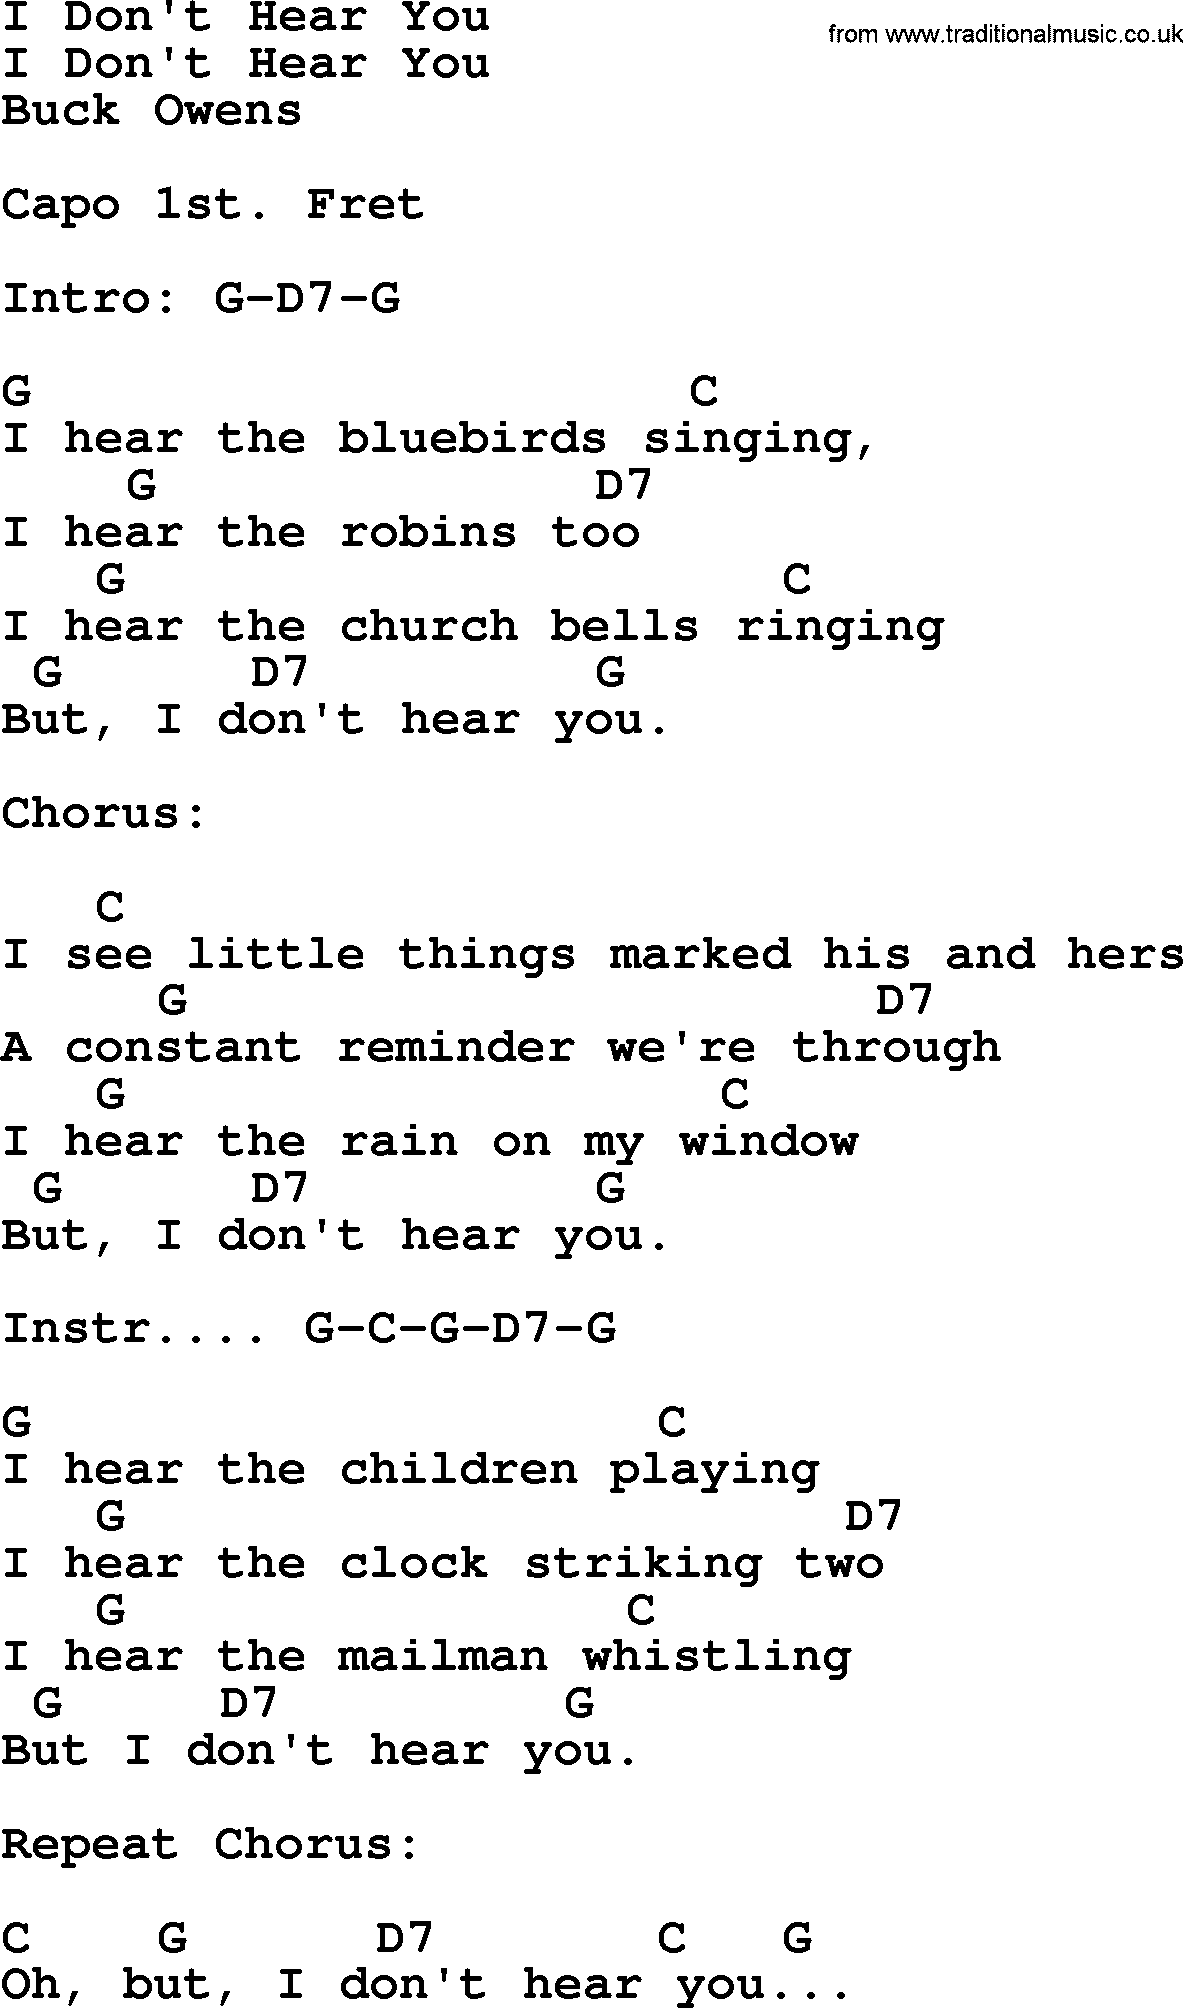 Bluegrass song: I Don't Hear You, lyrics and chords